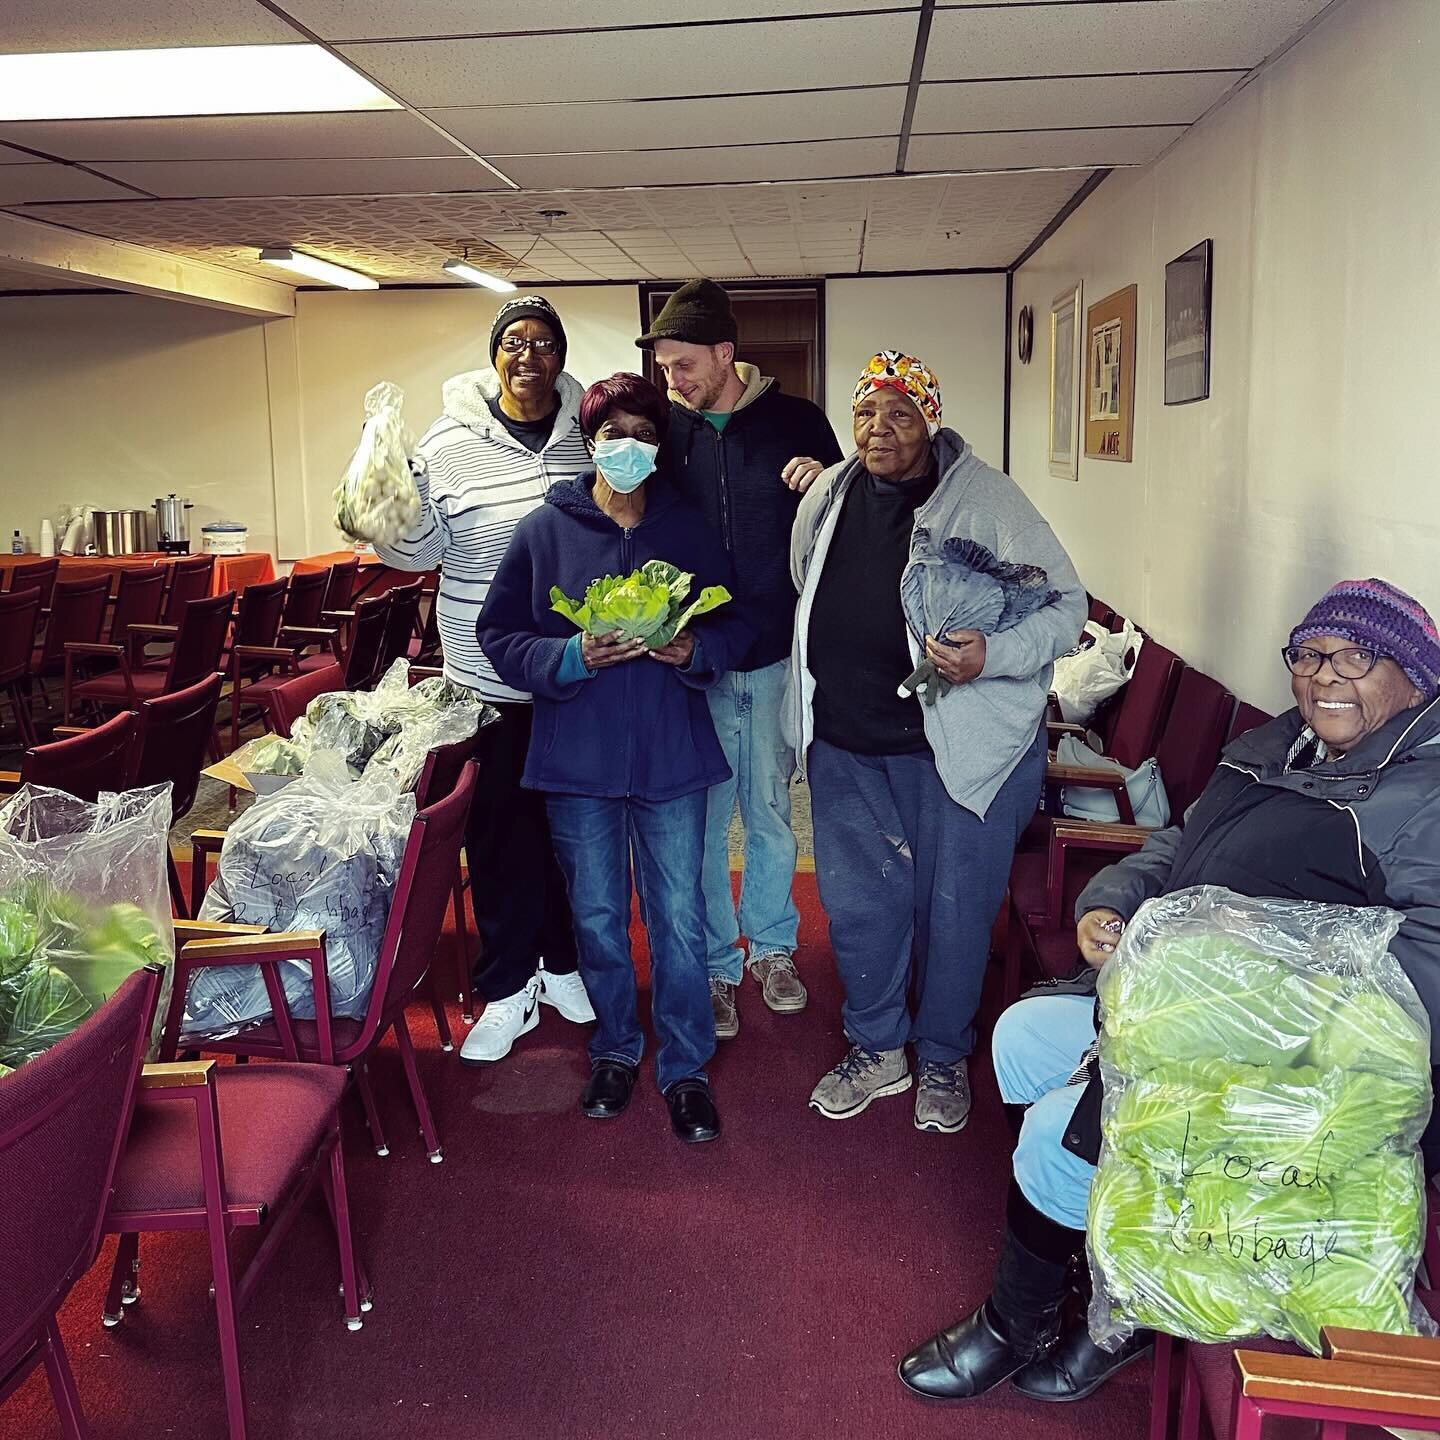 What a joy to start the New Year with a donation of over 50 lbs of fresh broccoli, cabbage, chard, mustard greens &amp; turnips from the farm to our dear friends at Anointed Impact Ministries Food Pantry in Benton Harbor! Probably our last donation h